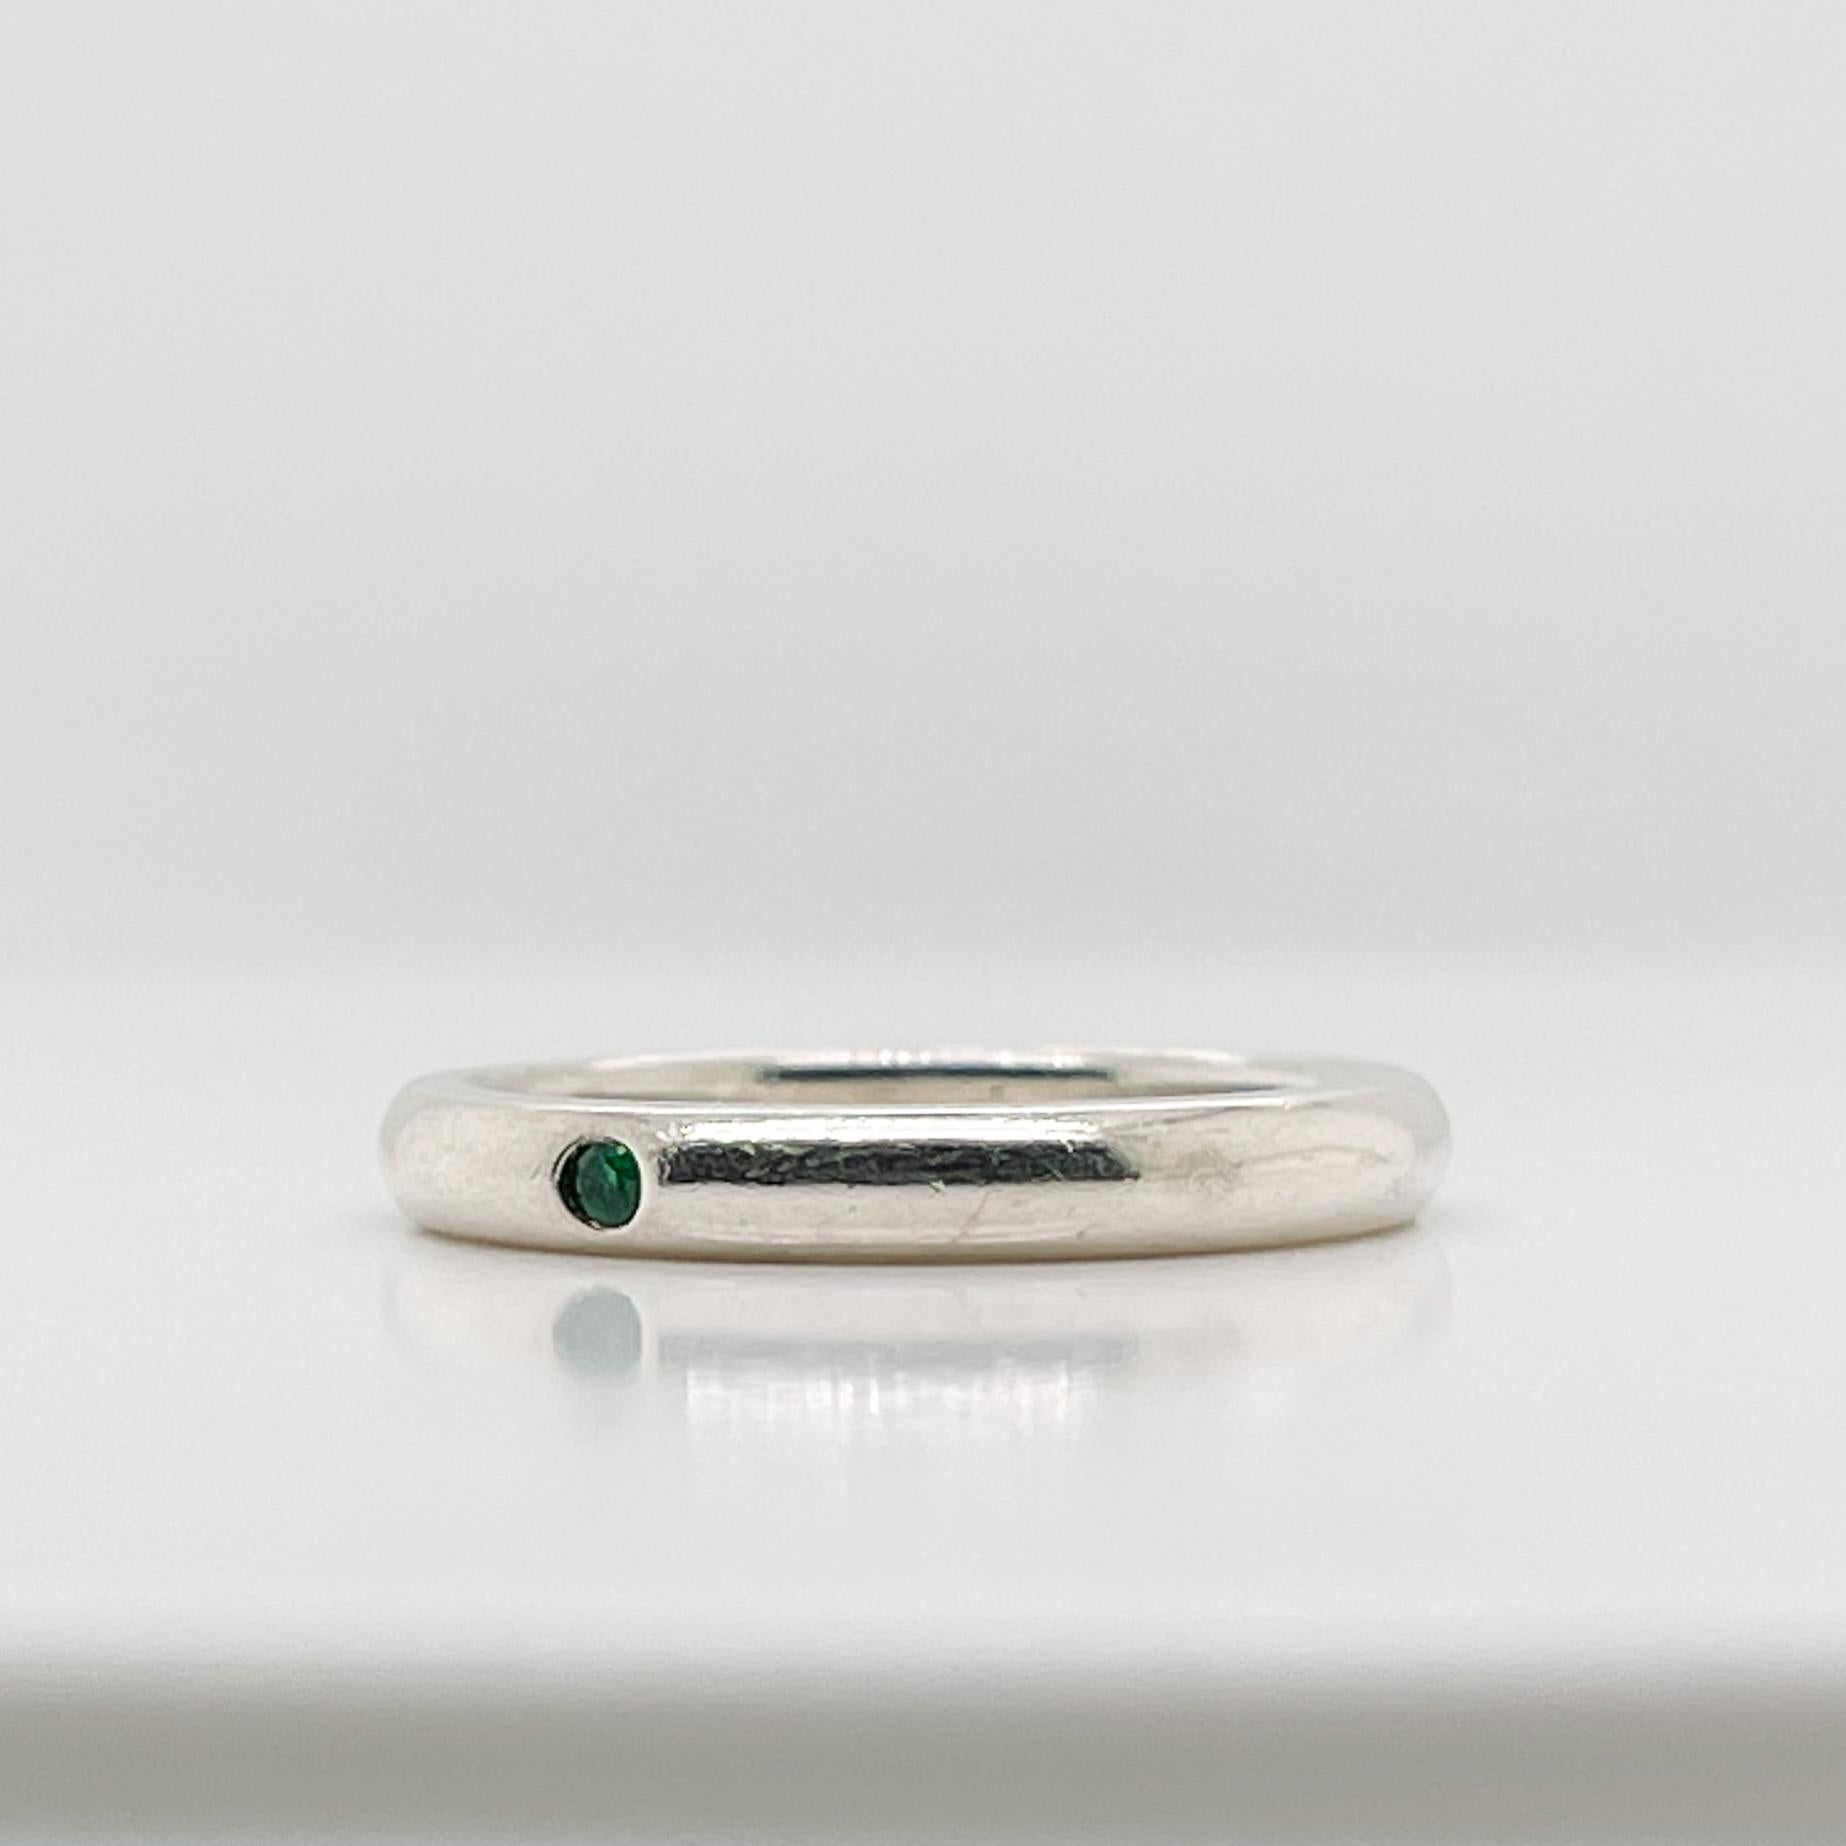 A very fine Tiffany & Co. stackable sterling silver ring.	

By Elsa Peretti. 

Flush set with a round cut emerald.

Perfect, Simple, Refined.

Date:
20th Century

Overall Condition:
It is in overall good, as-pictured, used estate condition with some